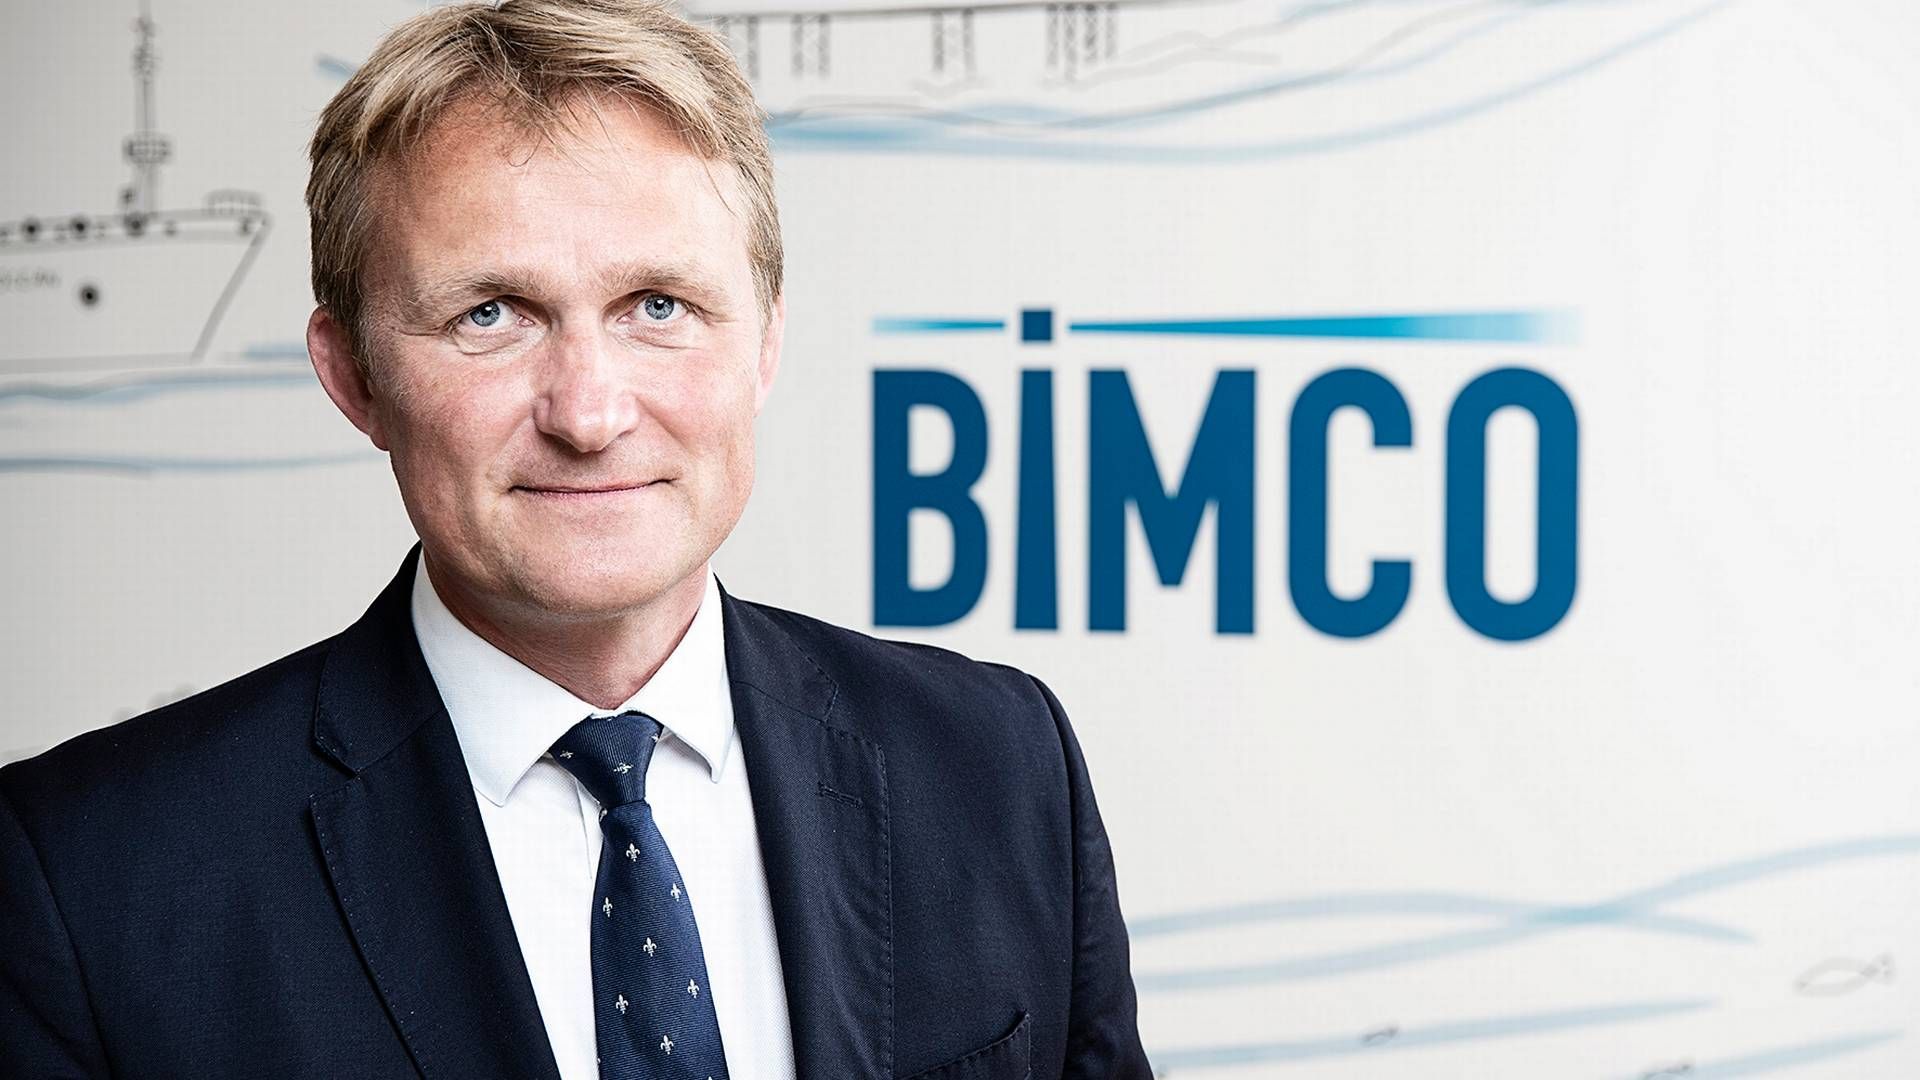 There are still legal gray areas that need to be clarified before the new Hong Kong Convention on ship recycling comes into force in 2025, writes David Loosley, secretary general and CEO of Bimco. | Photo: Pr / Bimco